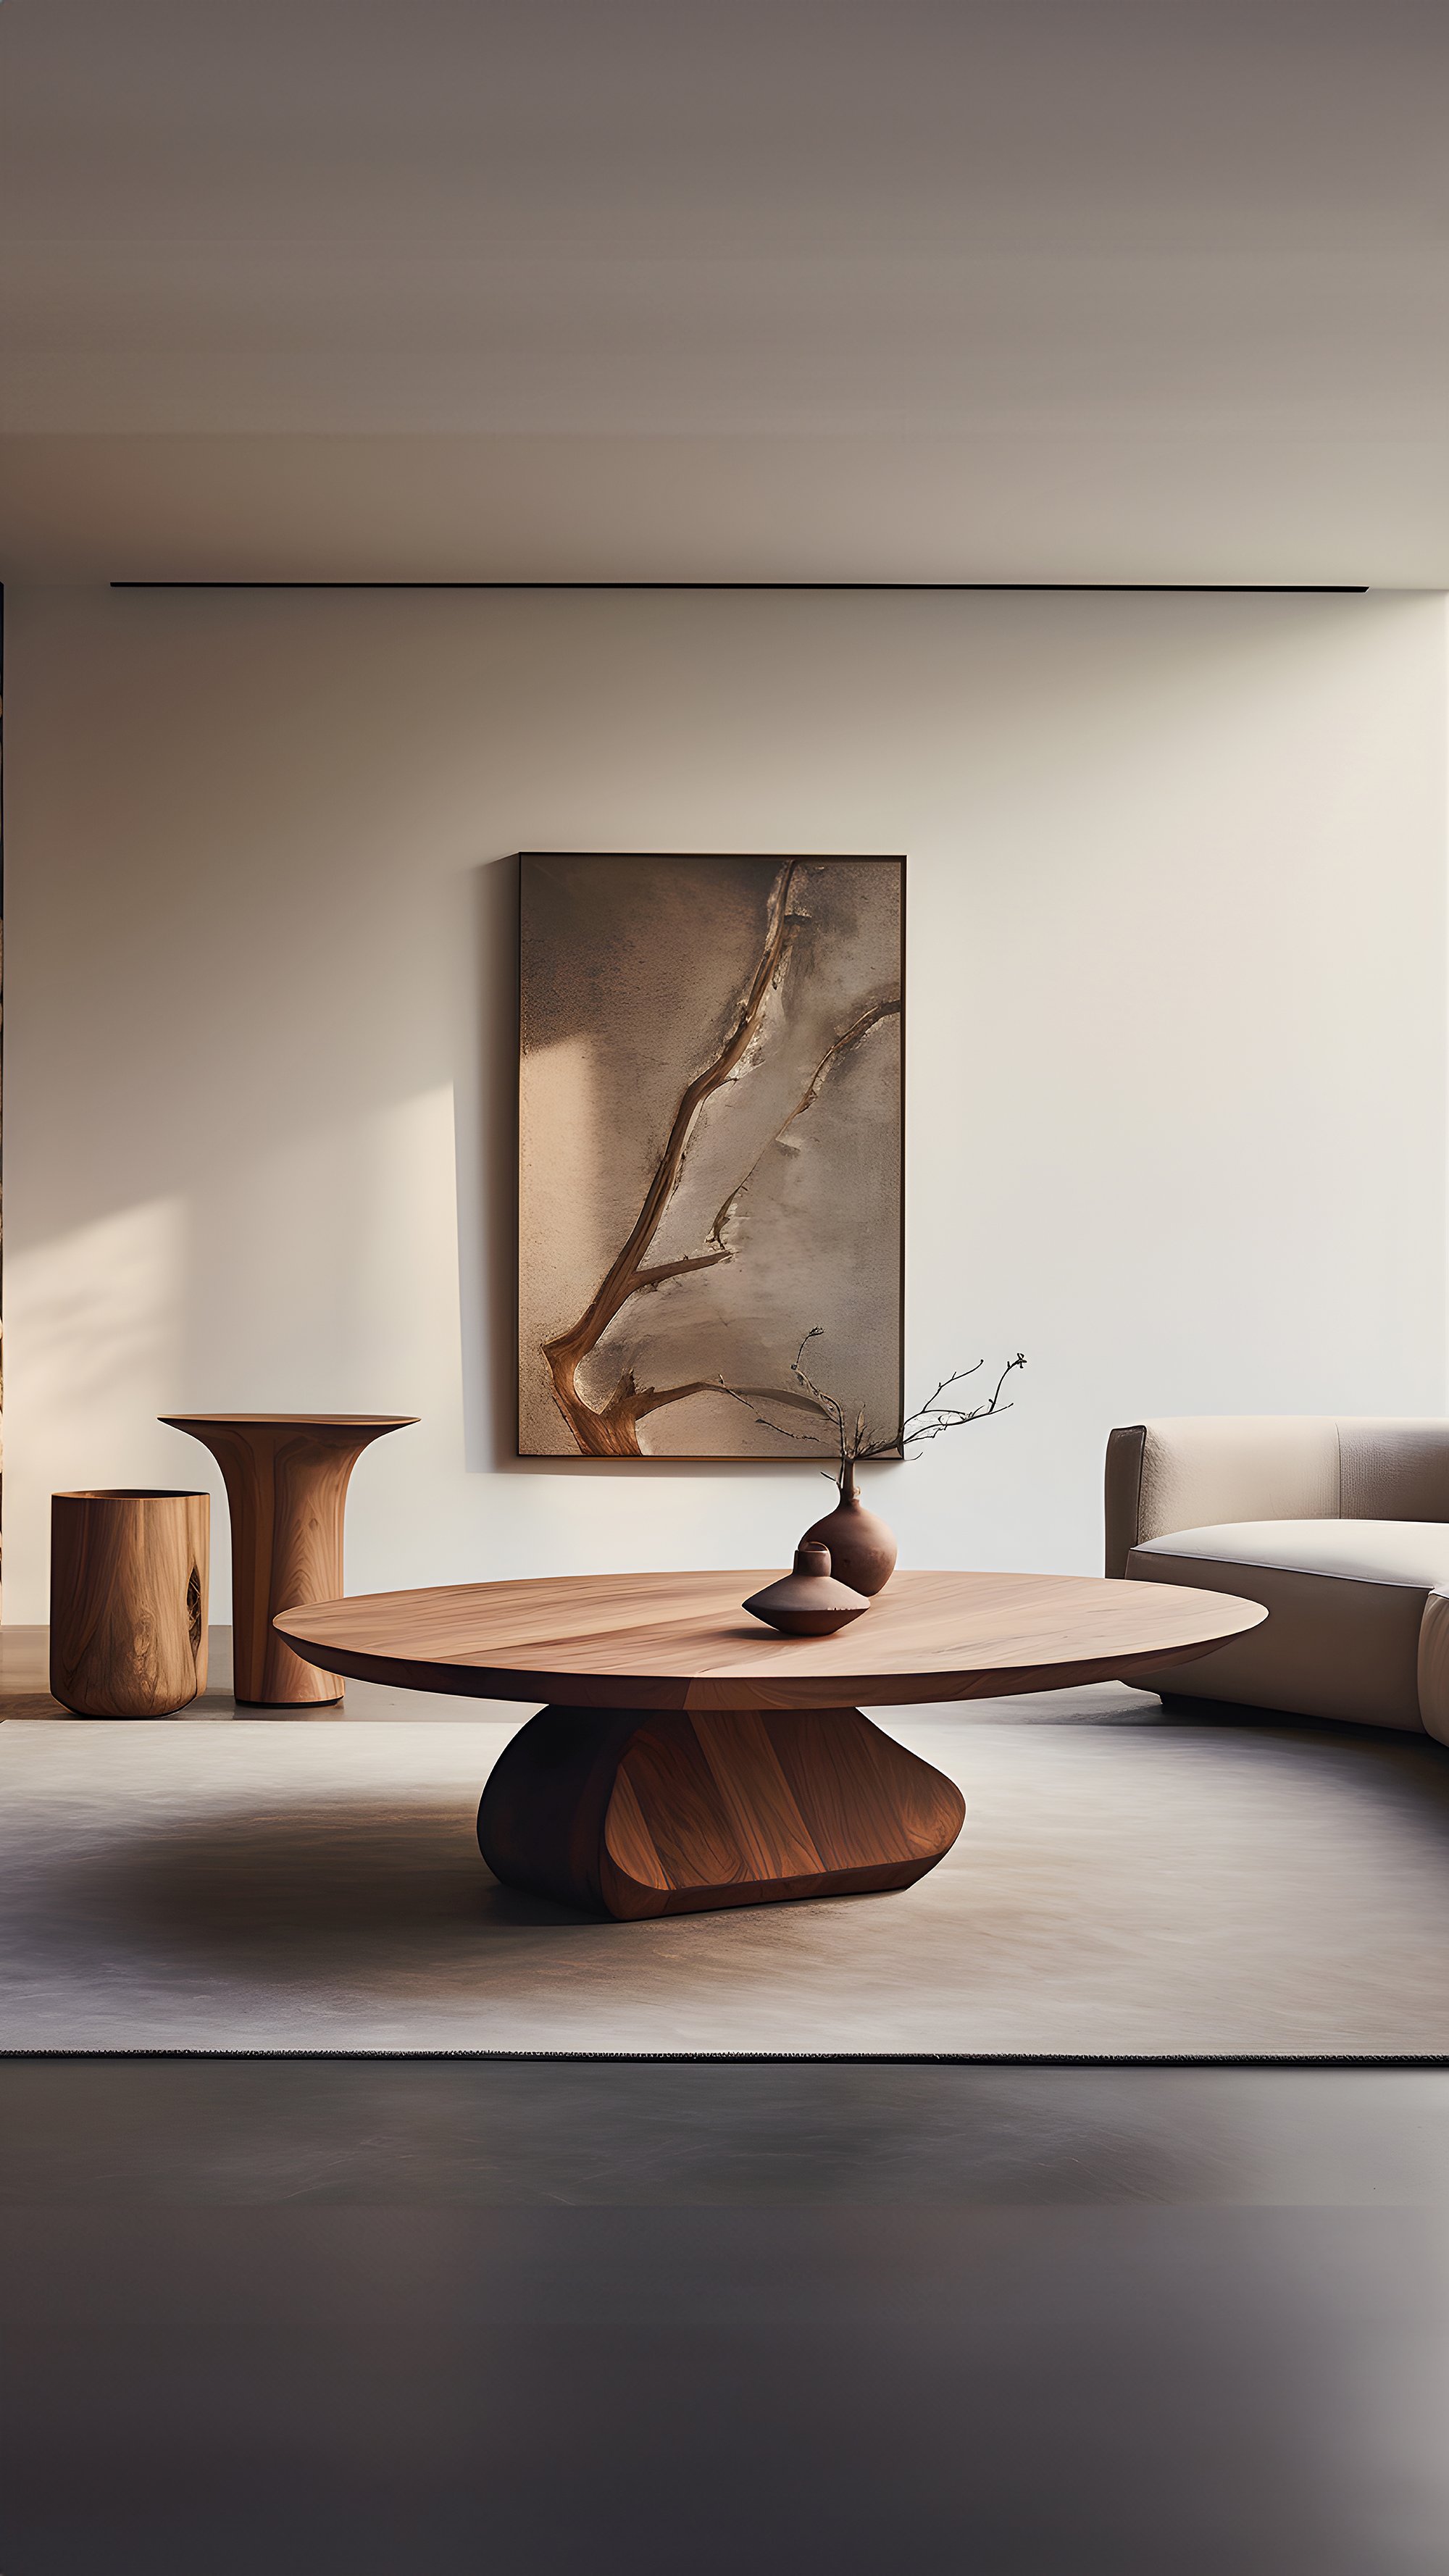 Sculptural Coffee Table Made of Solid Wood, Center Table Solace S46 by Joel Escalona — 4.jpg